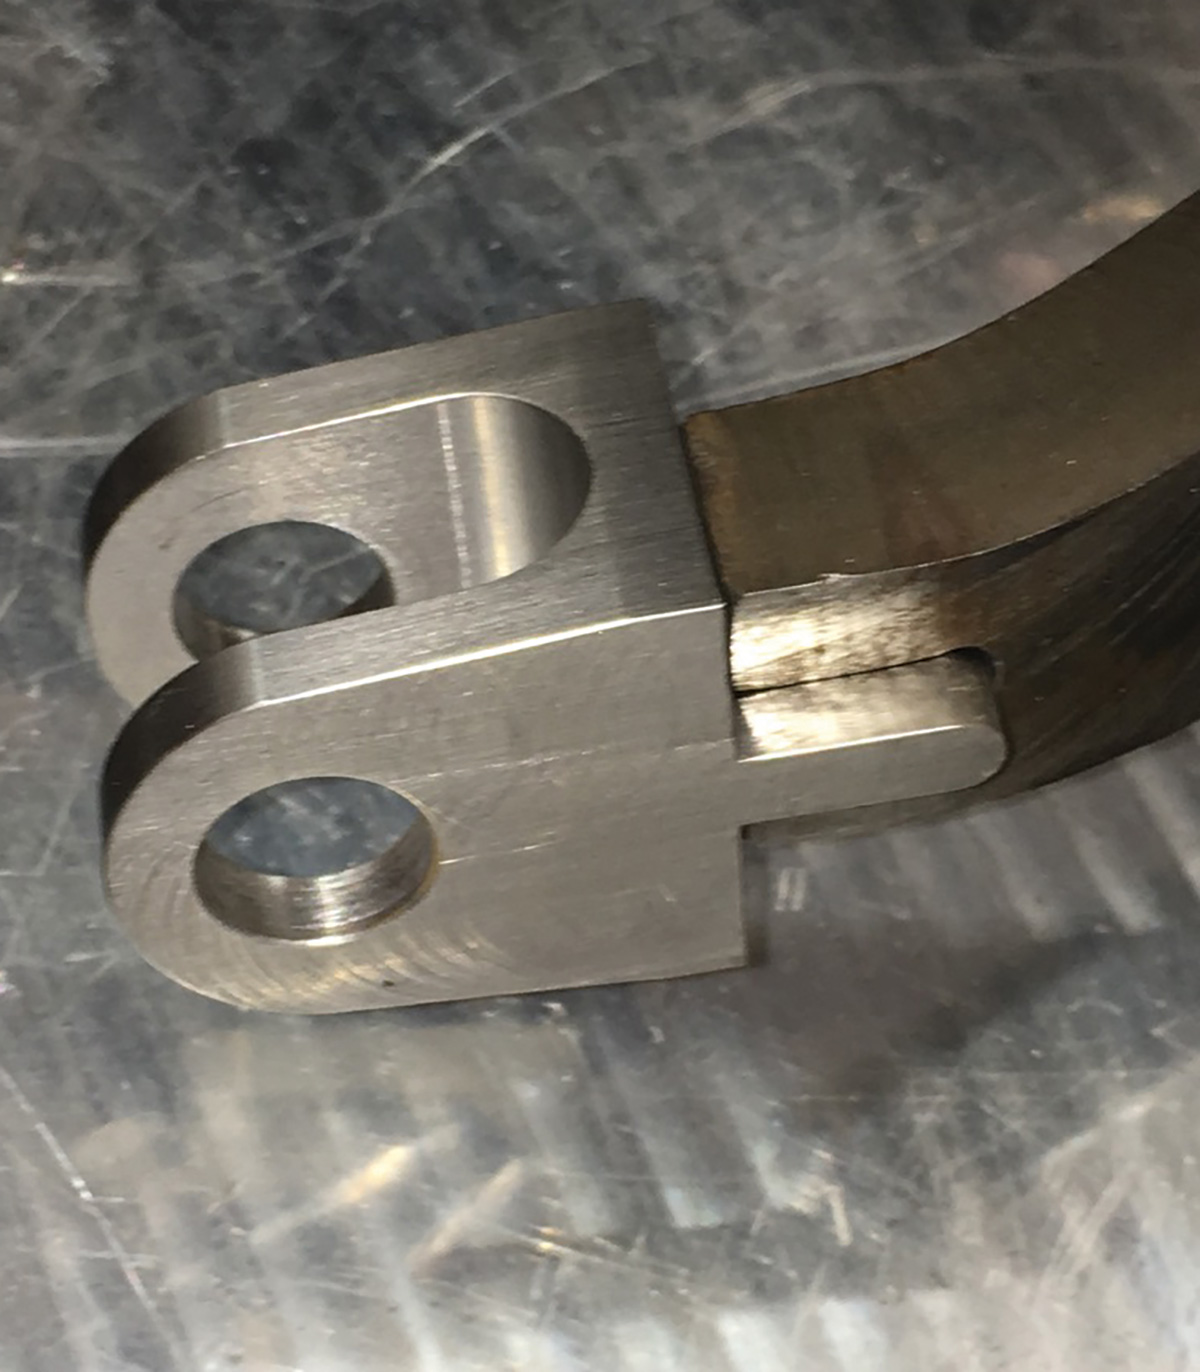 All the steering connection points have been modified to include double-shear attachment points. Note how the new machined end fits into the Pitman with a “key” for additional weld area and strength.